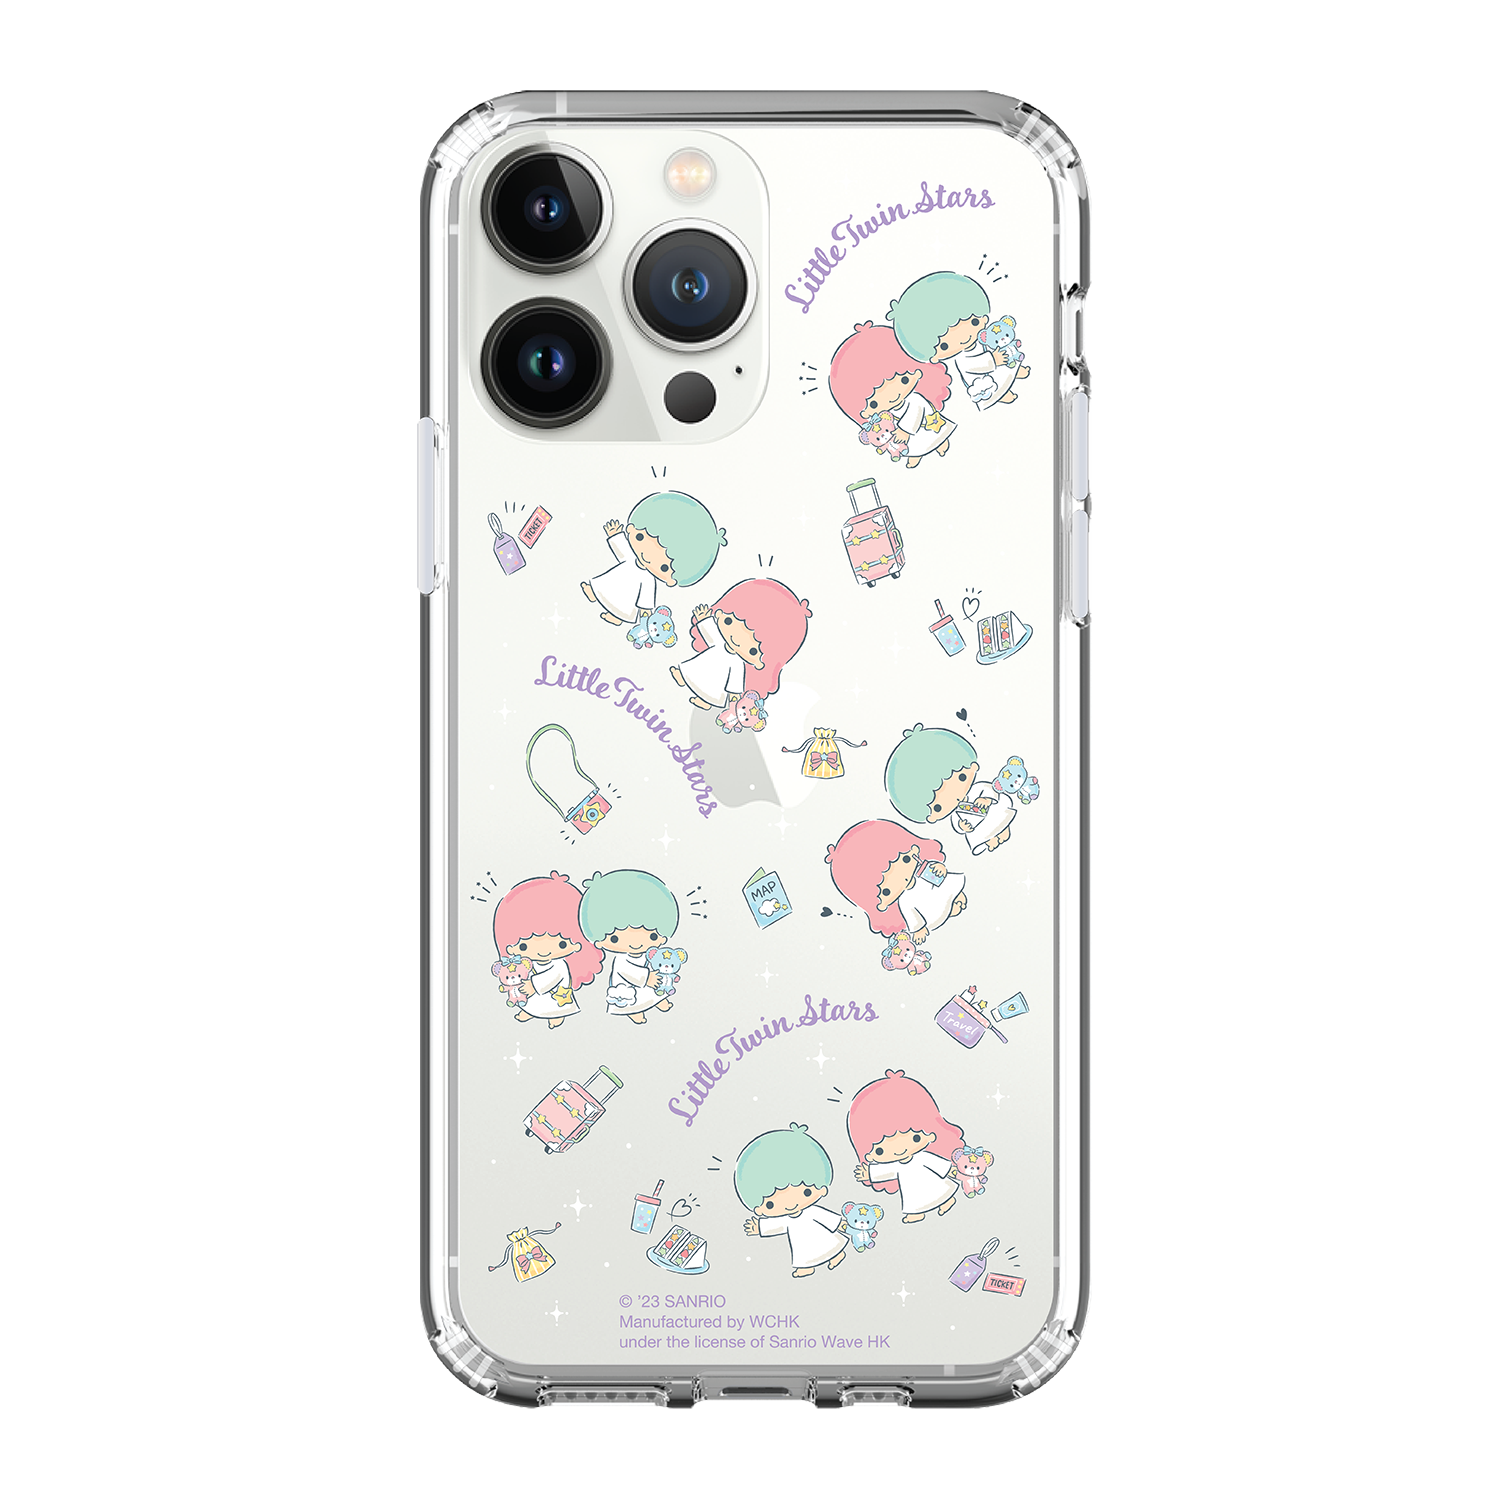 Little Twin Stars Clear Case / iPhone Case / Android Case / Samsung Case 防撞透明手機殼 (TS149)